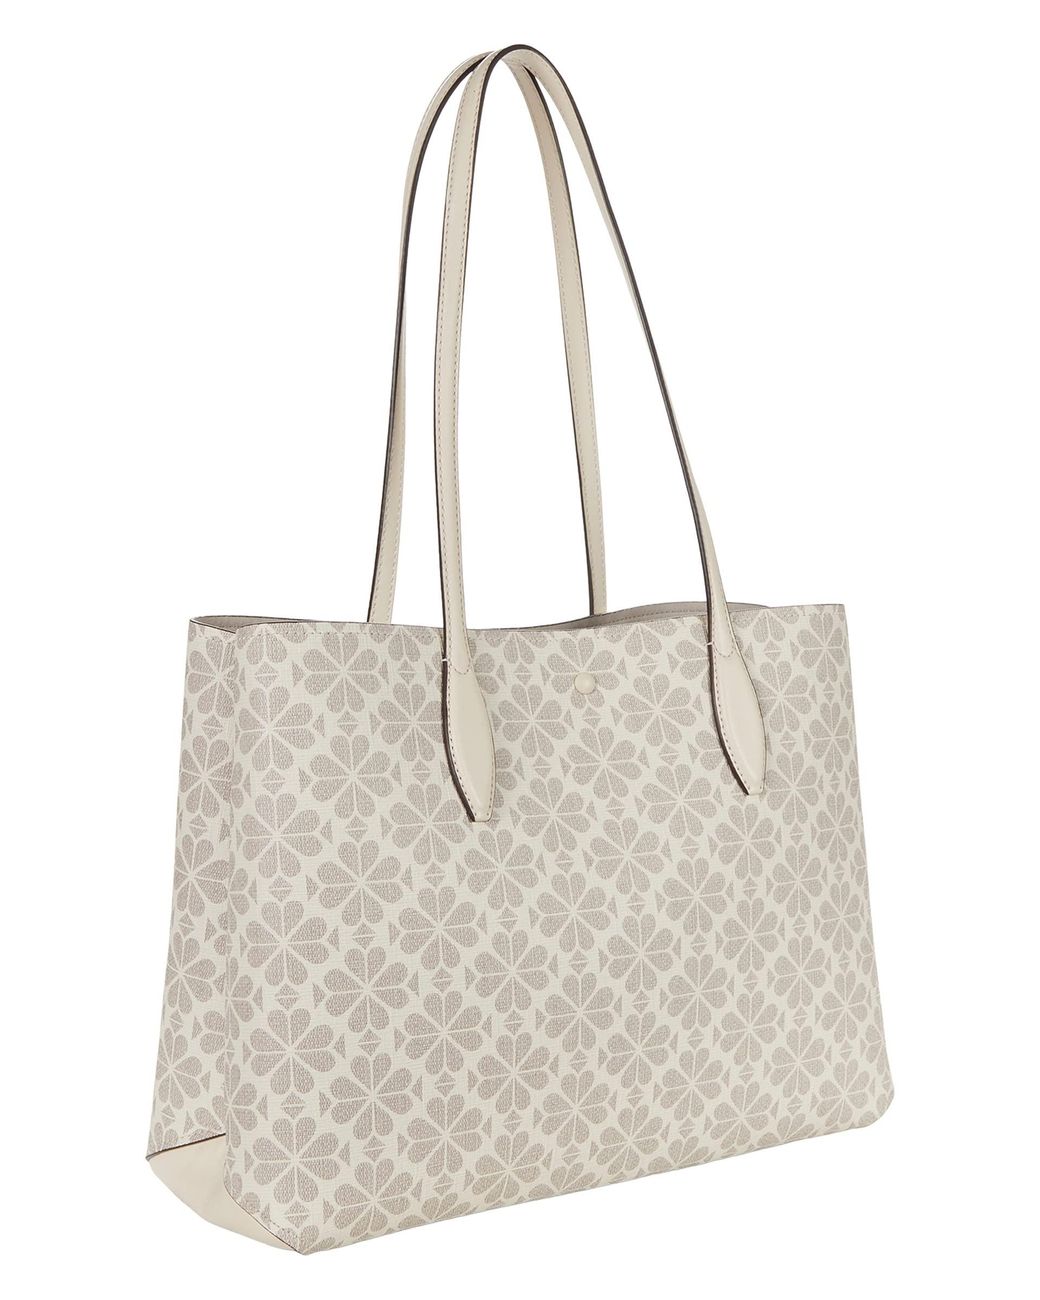 Kate Spade All Day Spade Flower Coated Canvas Large Tote | Lyst